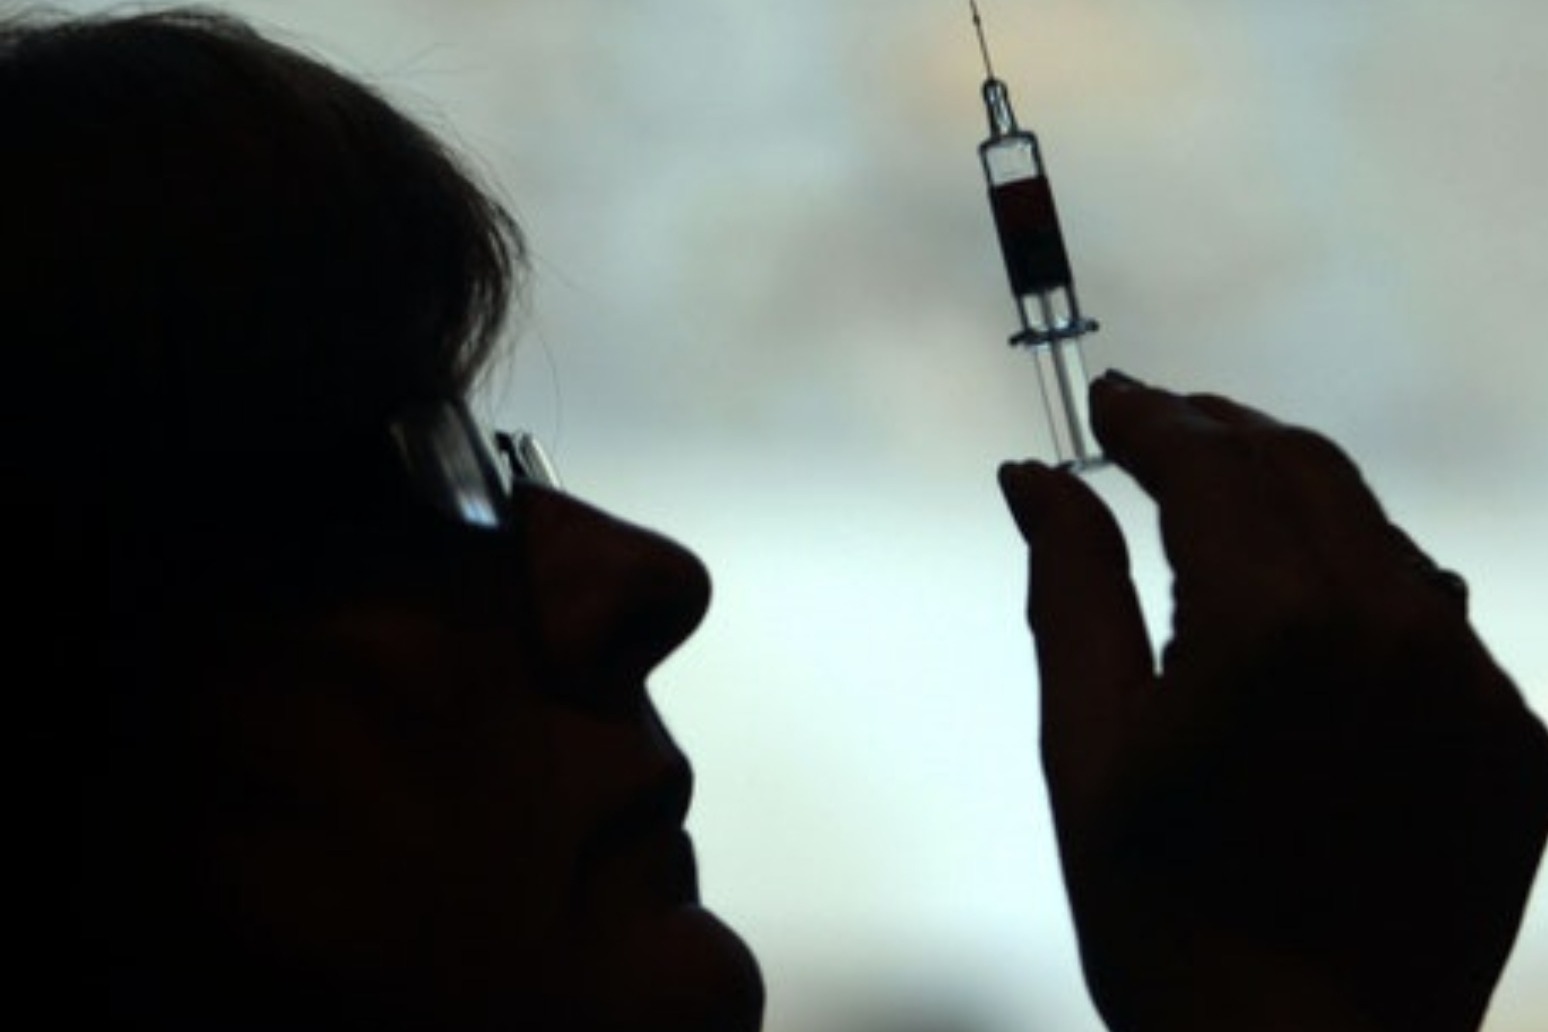 Pfizer vaccine is 95% effective and has passed safety checks, new data shows 